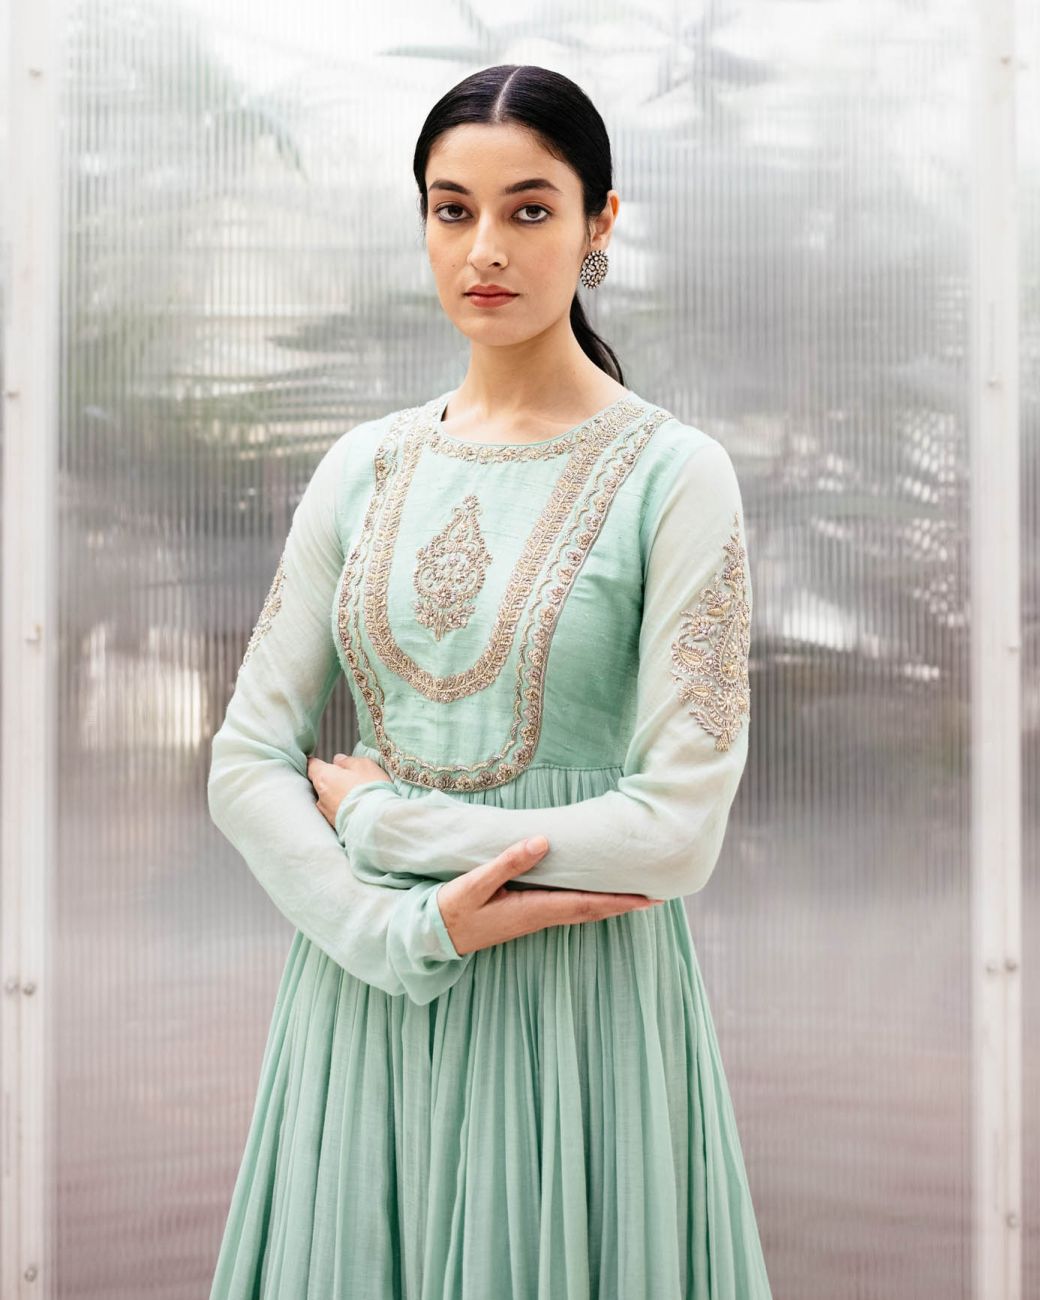 Mint Chanderi Embroidered Anarkali - Indian Clothing in Denver, CO, Aurora, CO, Boulder, CO, Fort Collins, CO, Colorado Springs, CO, Parker, CO, Highlands Ranch, CO, Cherry Creek, CO, Centennial, CO, and Longmont, CO. Nationwide shipping USA - India Fashion X